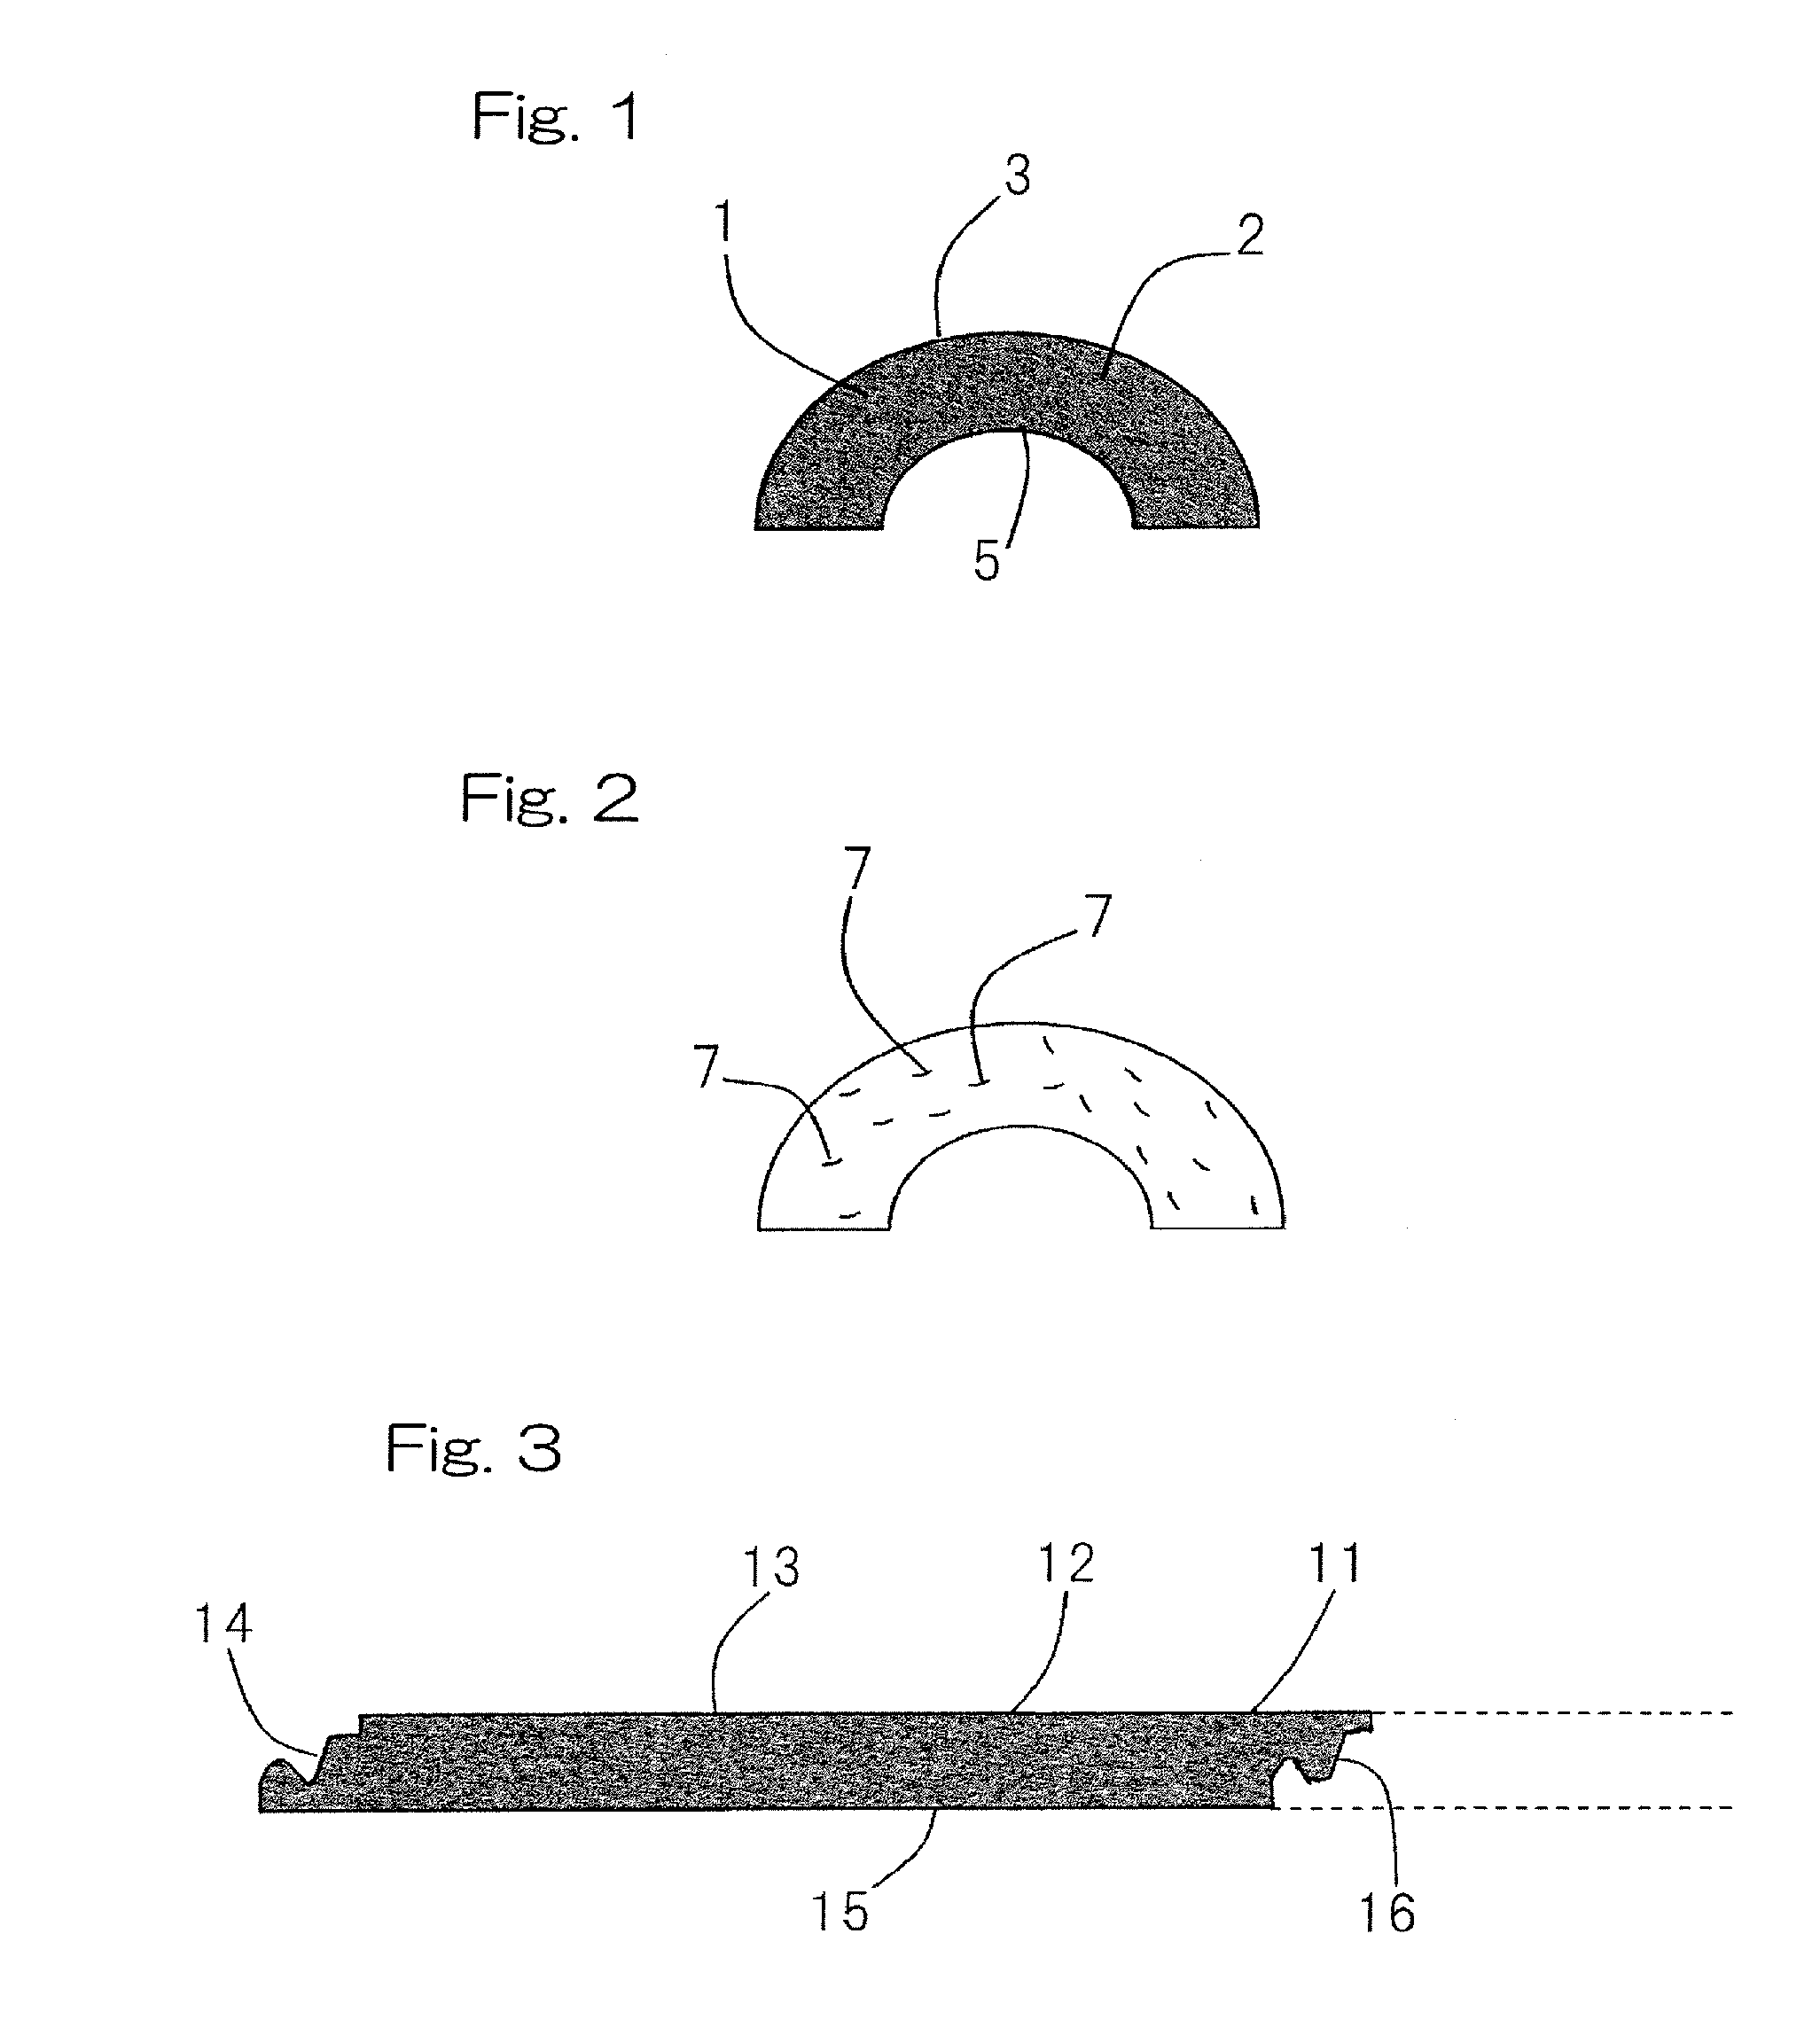 Concrete tile and molding material for same